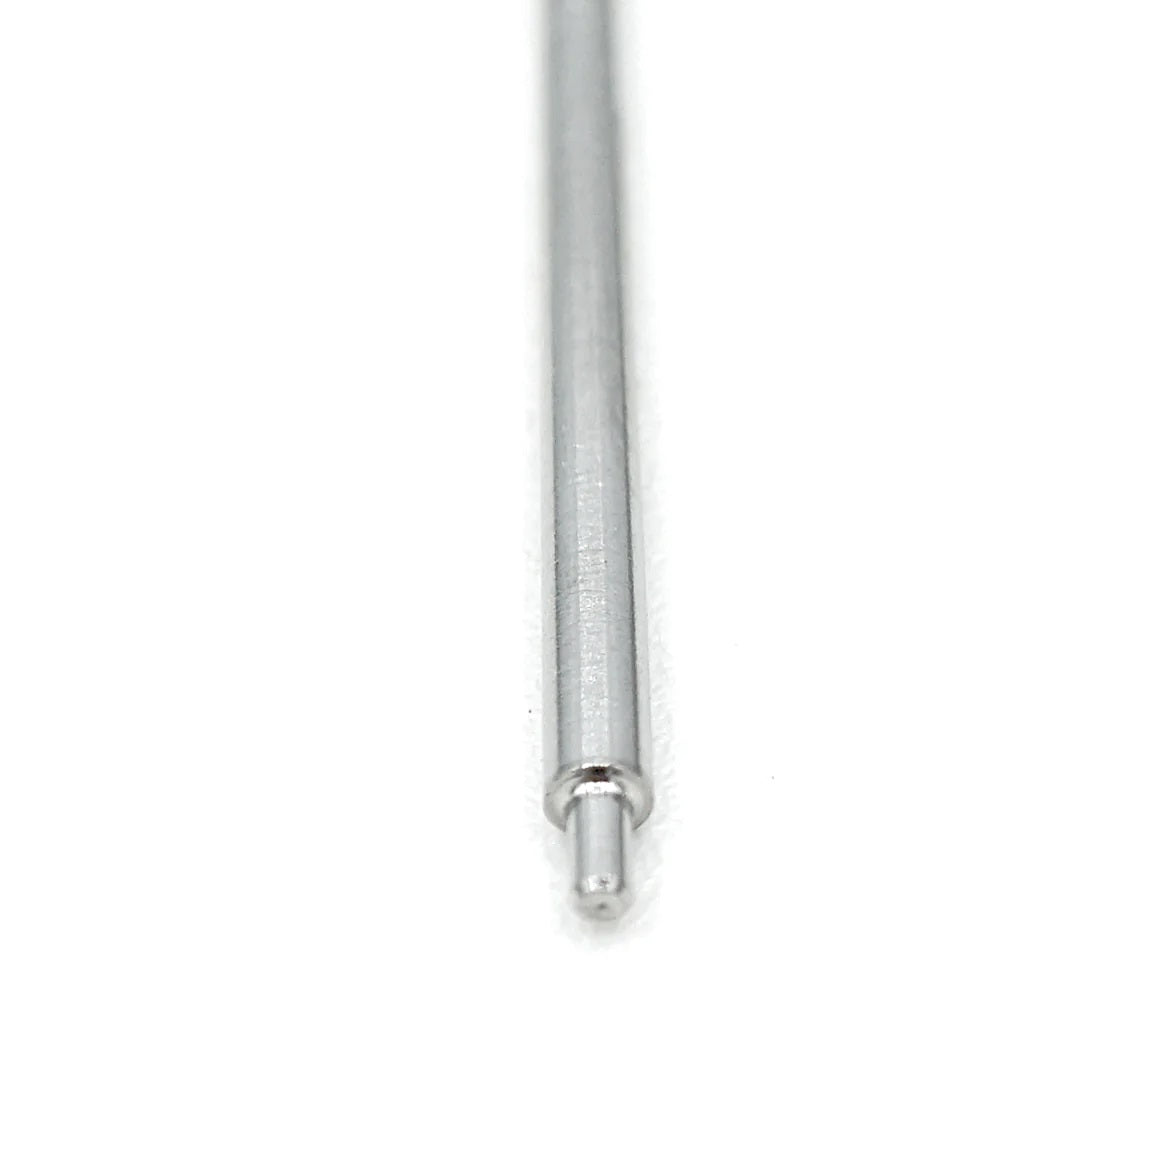 14G Tapers sterile pack of 50